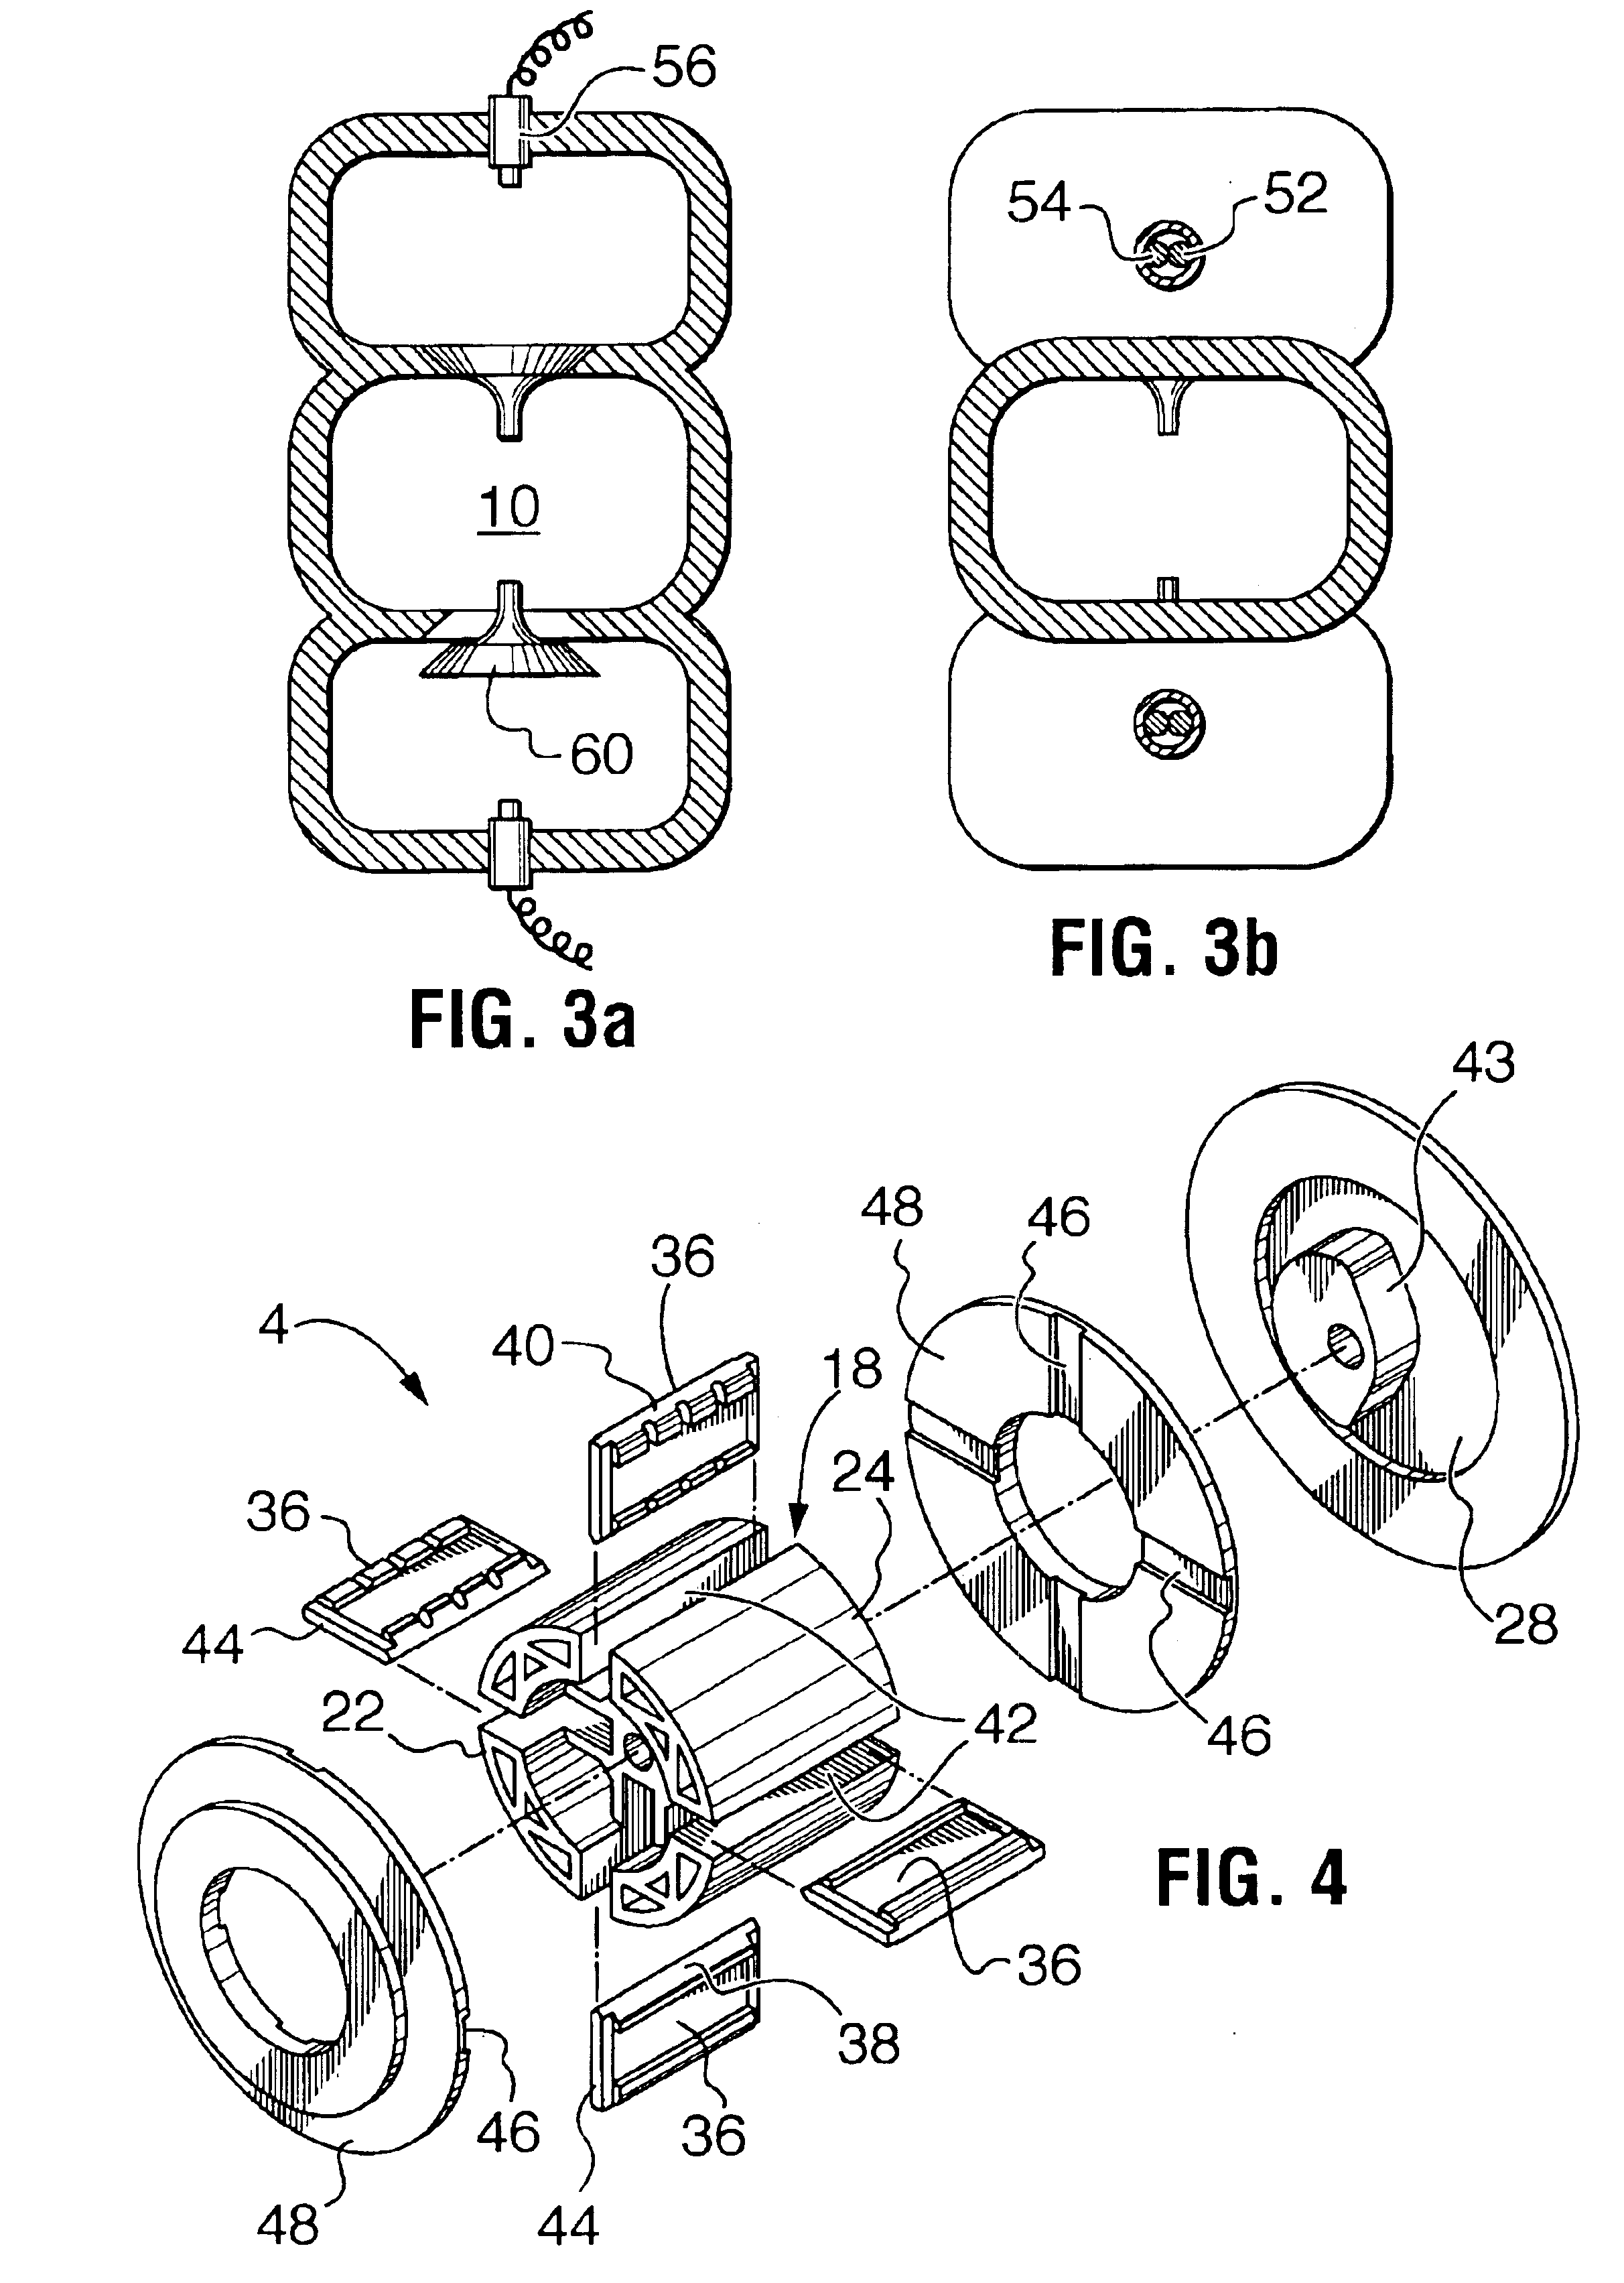 Combustion and exhaust heads for fluid turbine engines